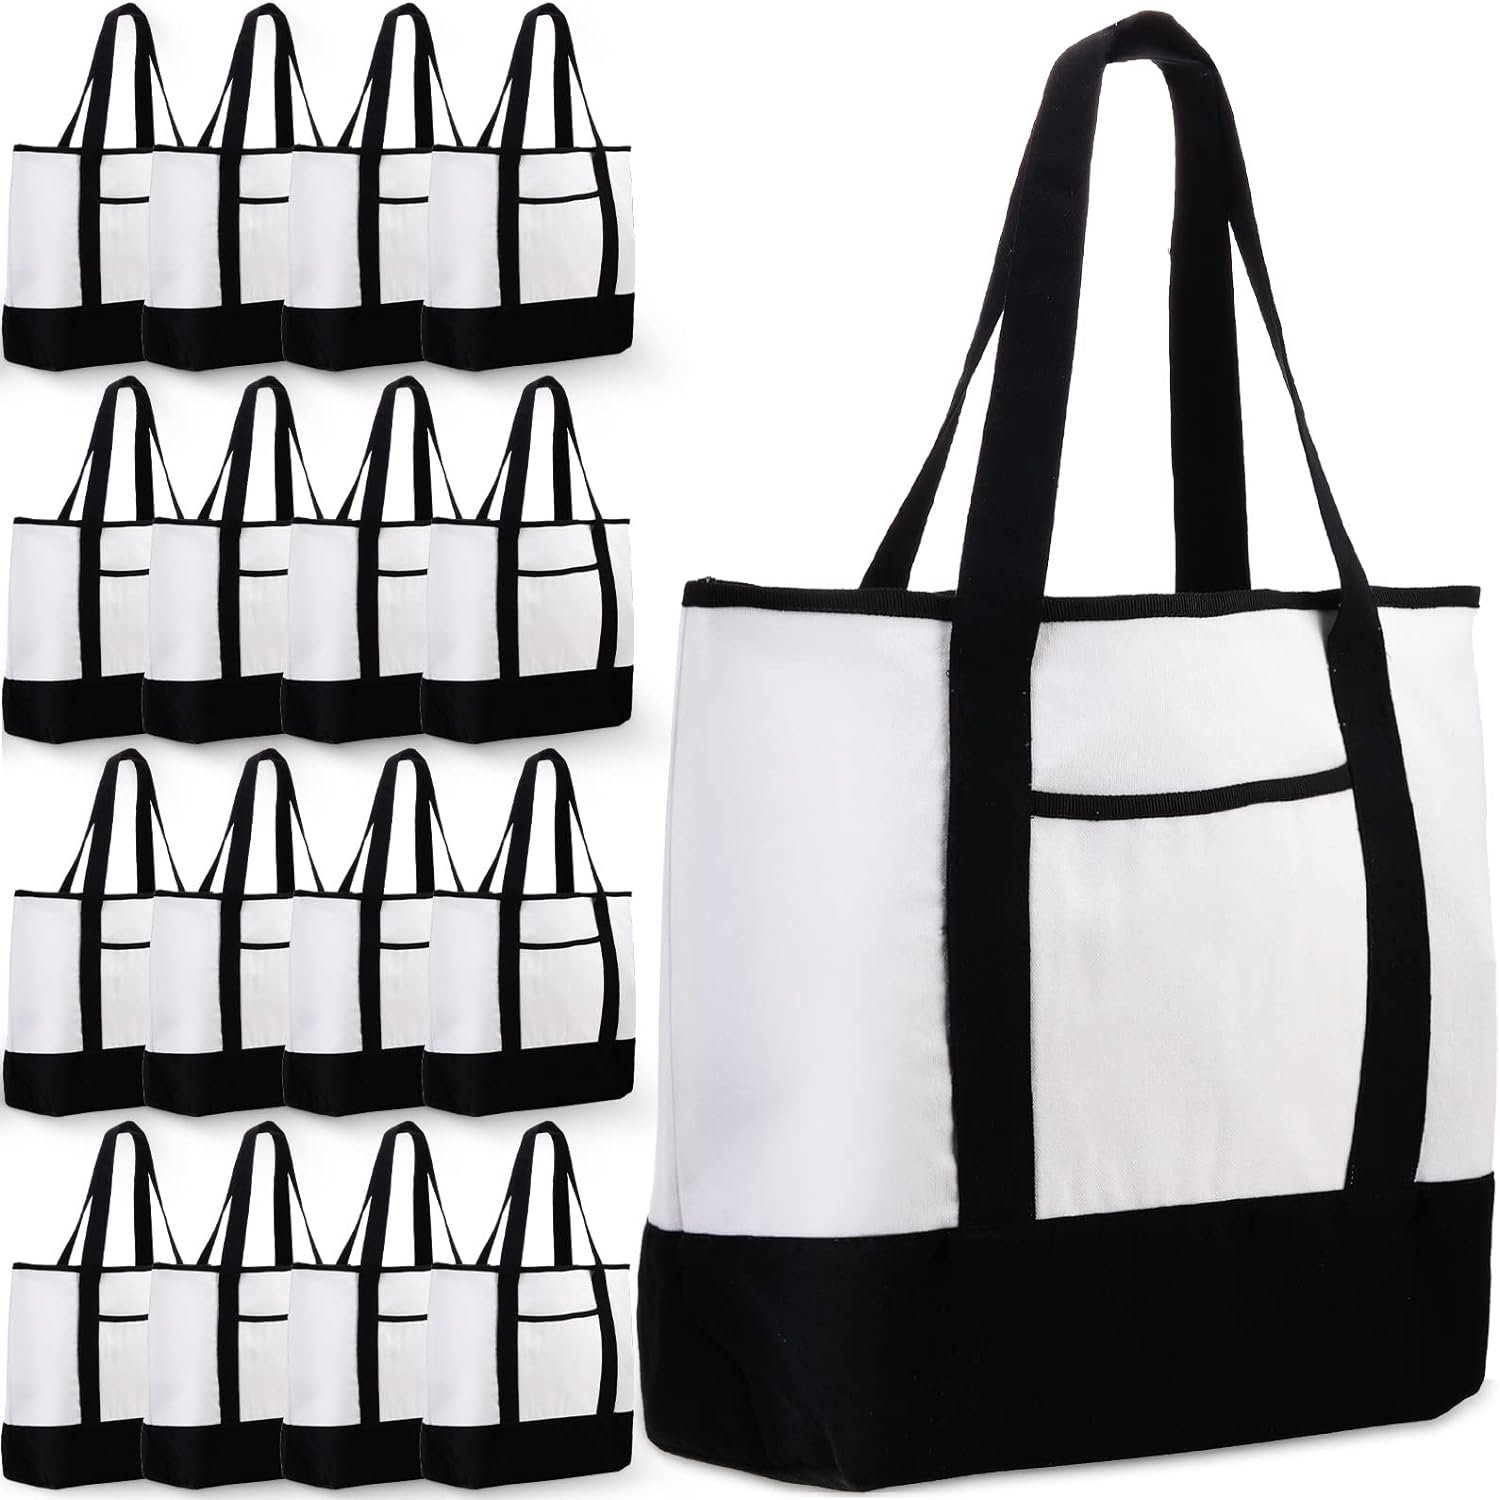 Bulk Tote Bags: Affordable Style For Every Occasion - Style Vanguard